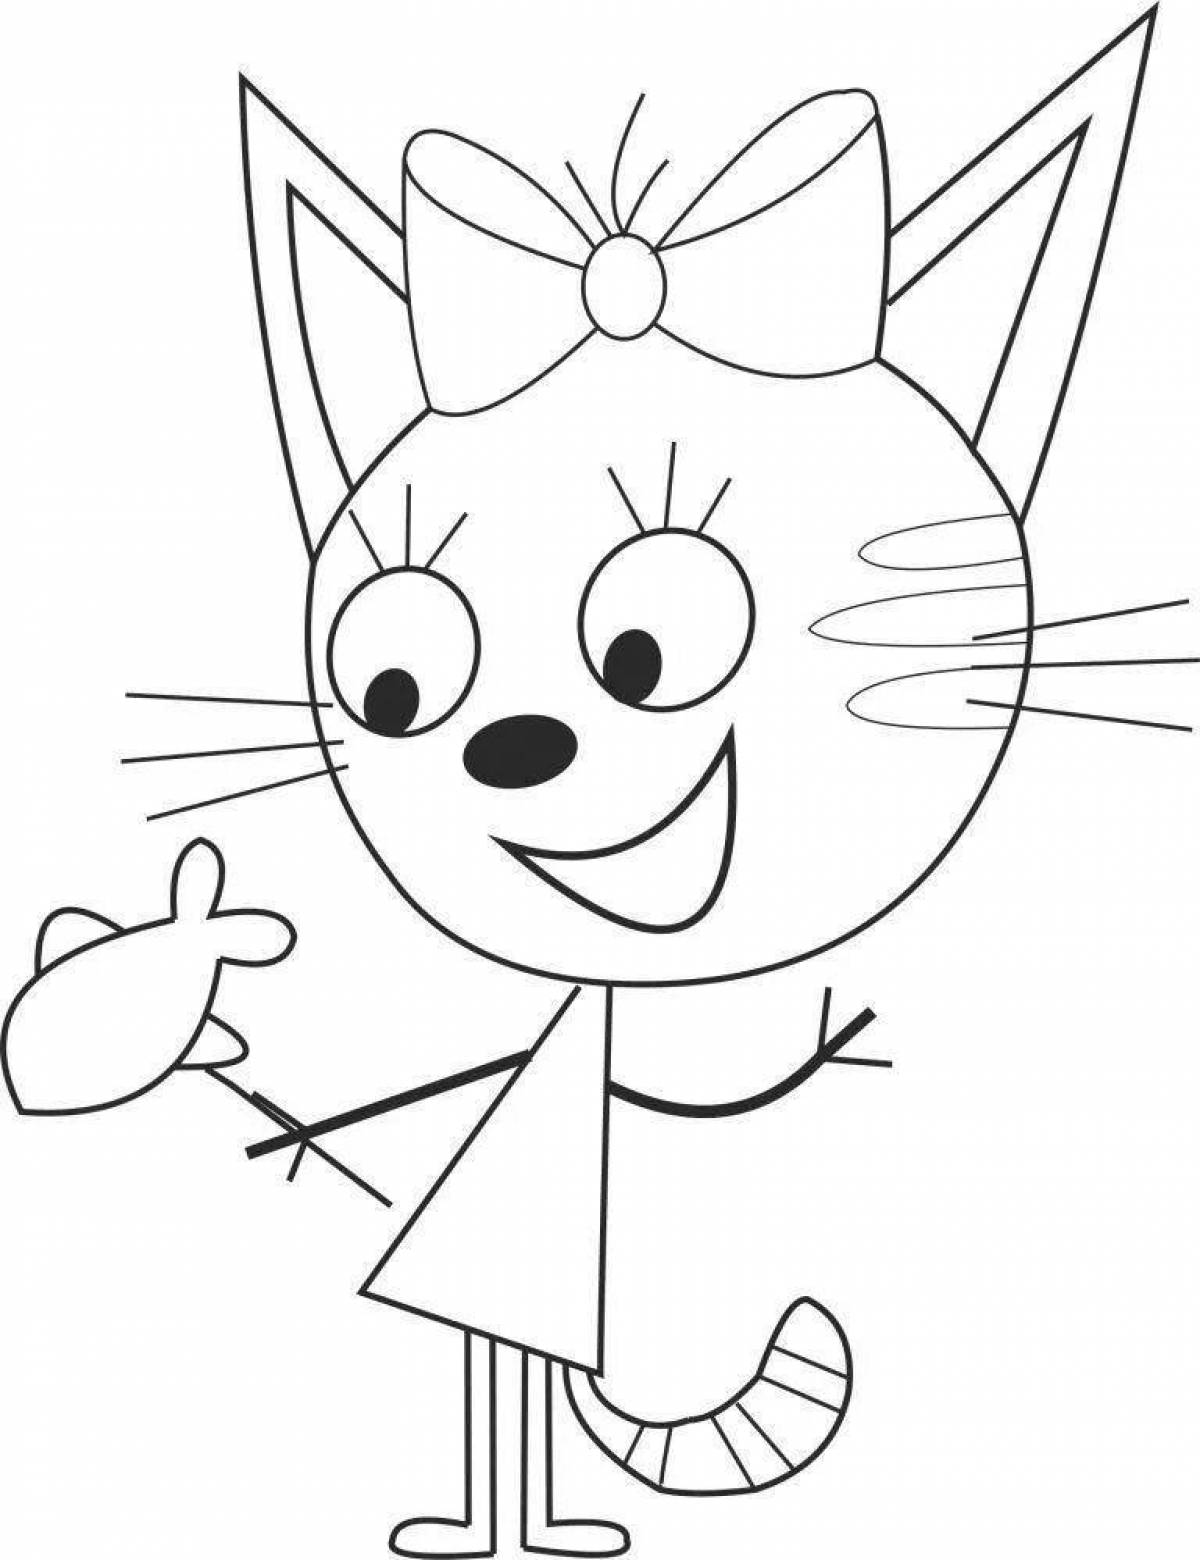 Three cats precious coloring book for kids